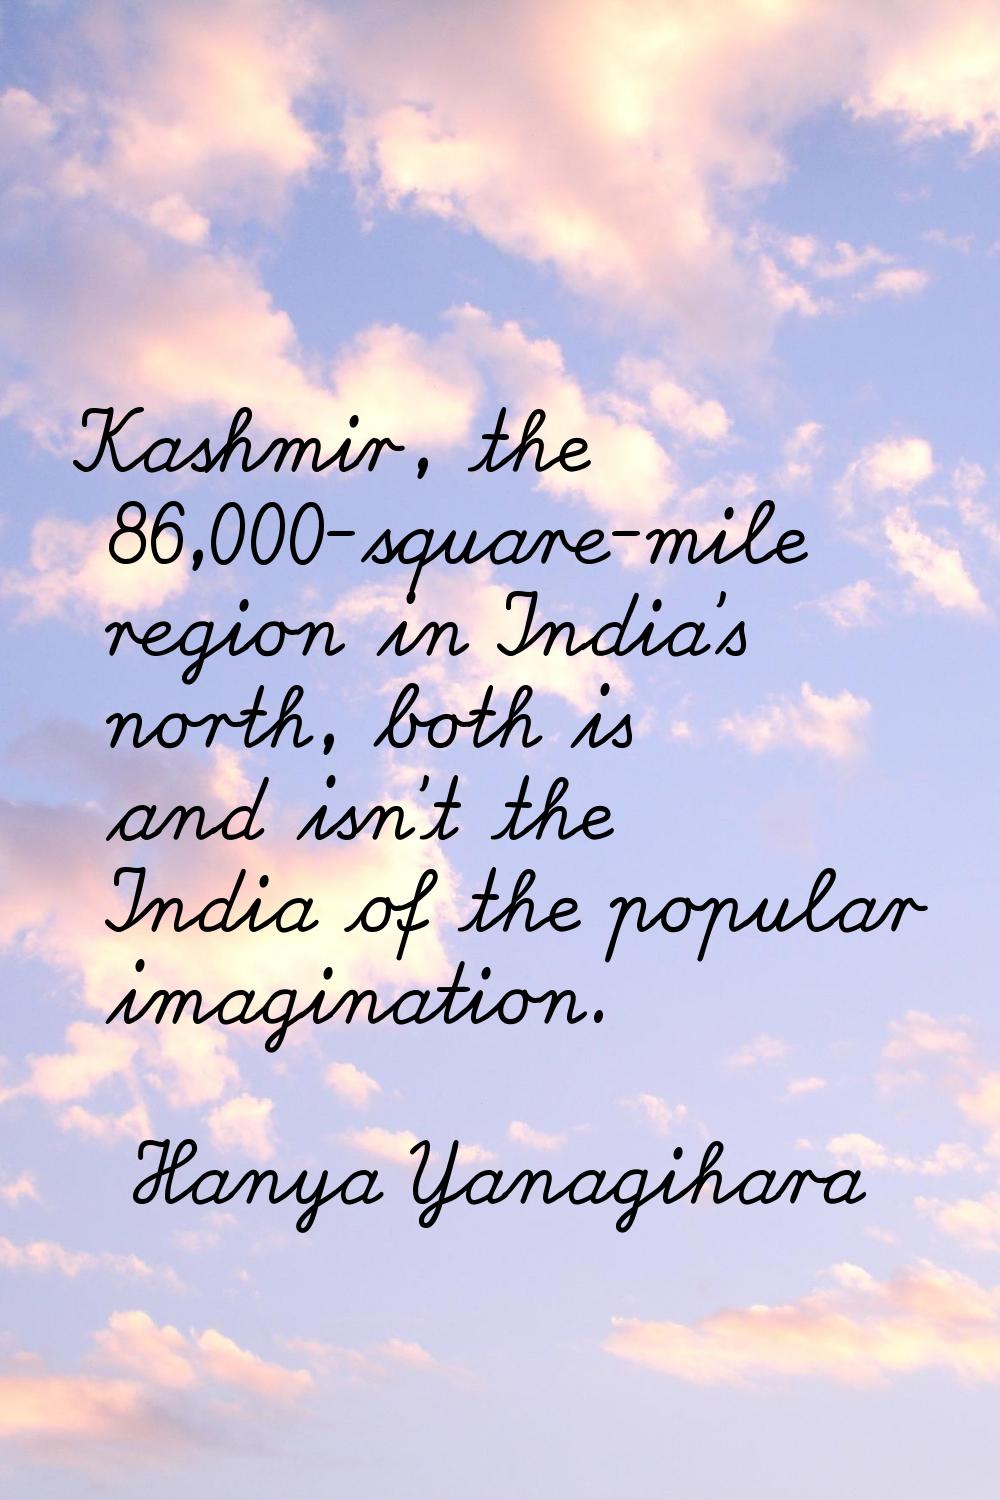 Kashmir, the 86,000-square-mile region in India's north, both is and isn't the India of the popular